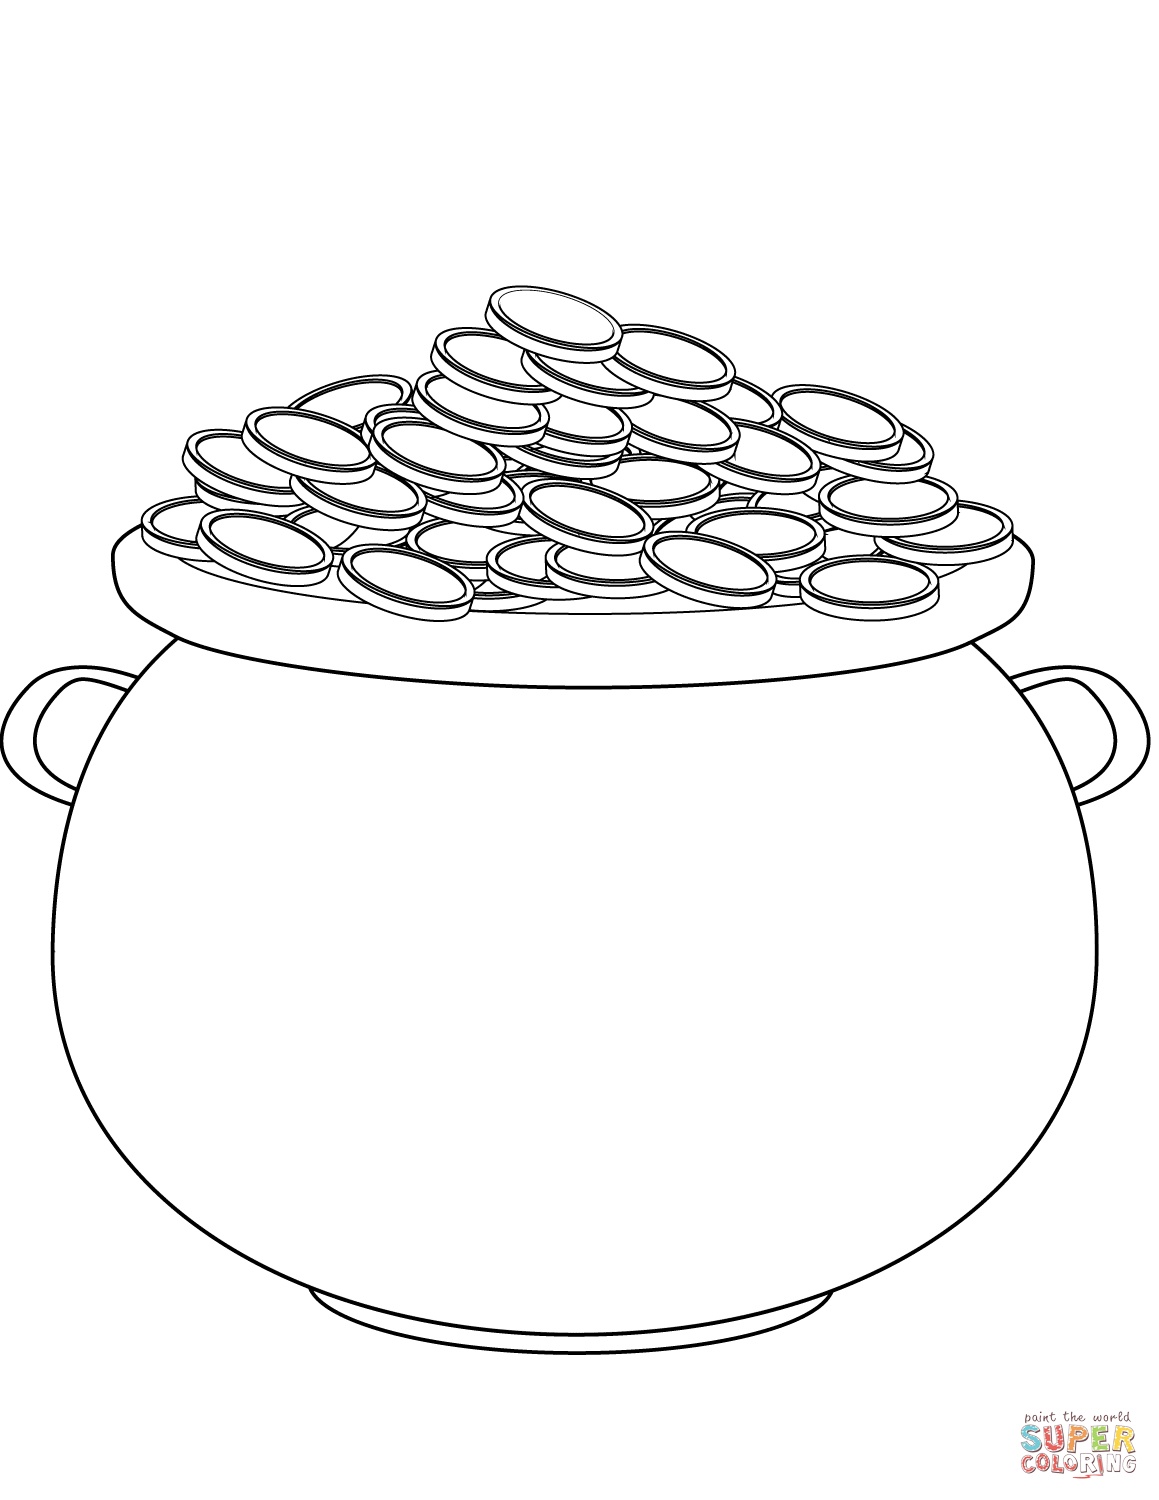 Saint Patrick&amp;#039;s Day Pot Of Gold Coloring Page | Free Printable - Free Printable Pot Of Gold Coloring Pages